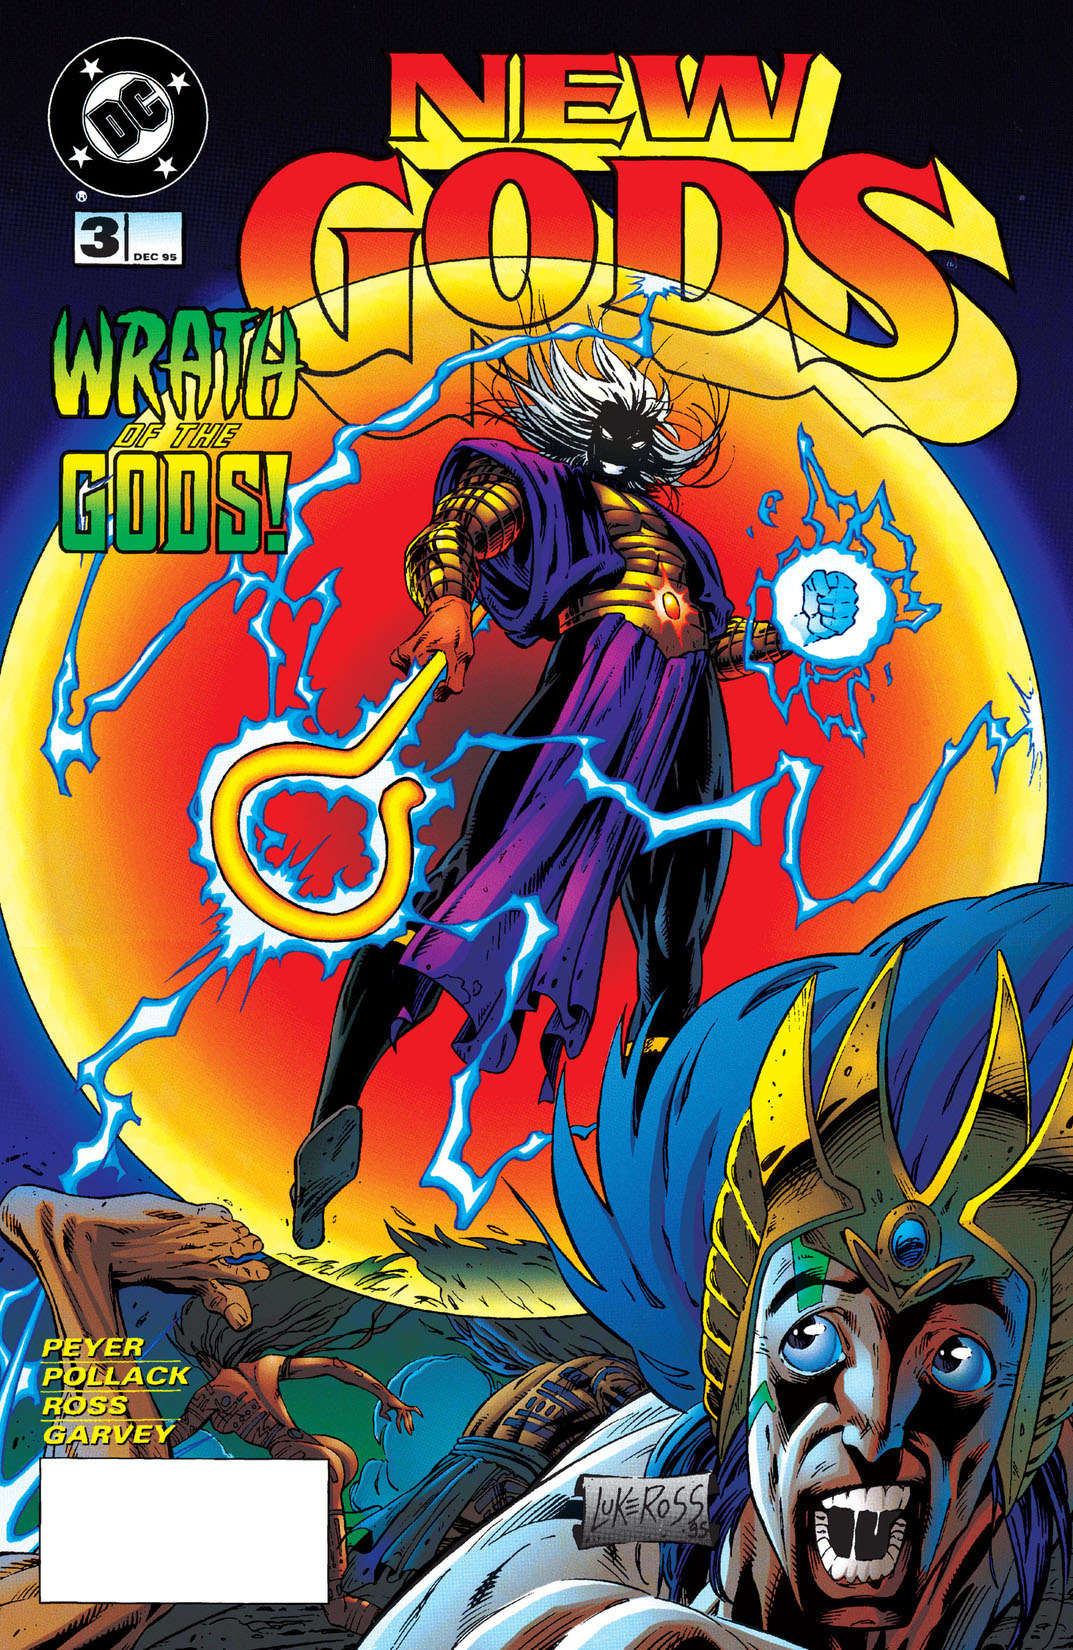 New Gods (1995-) #3 preview images